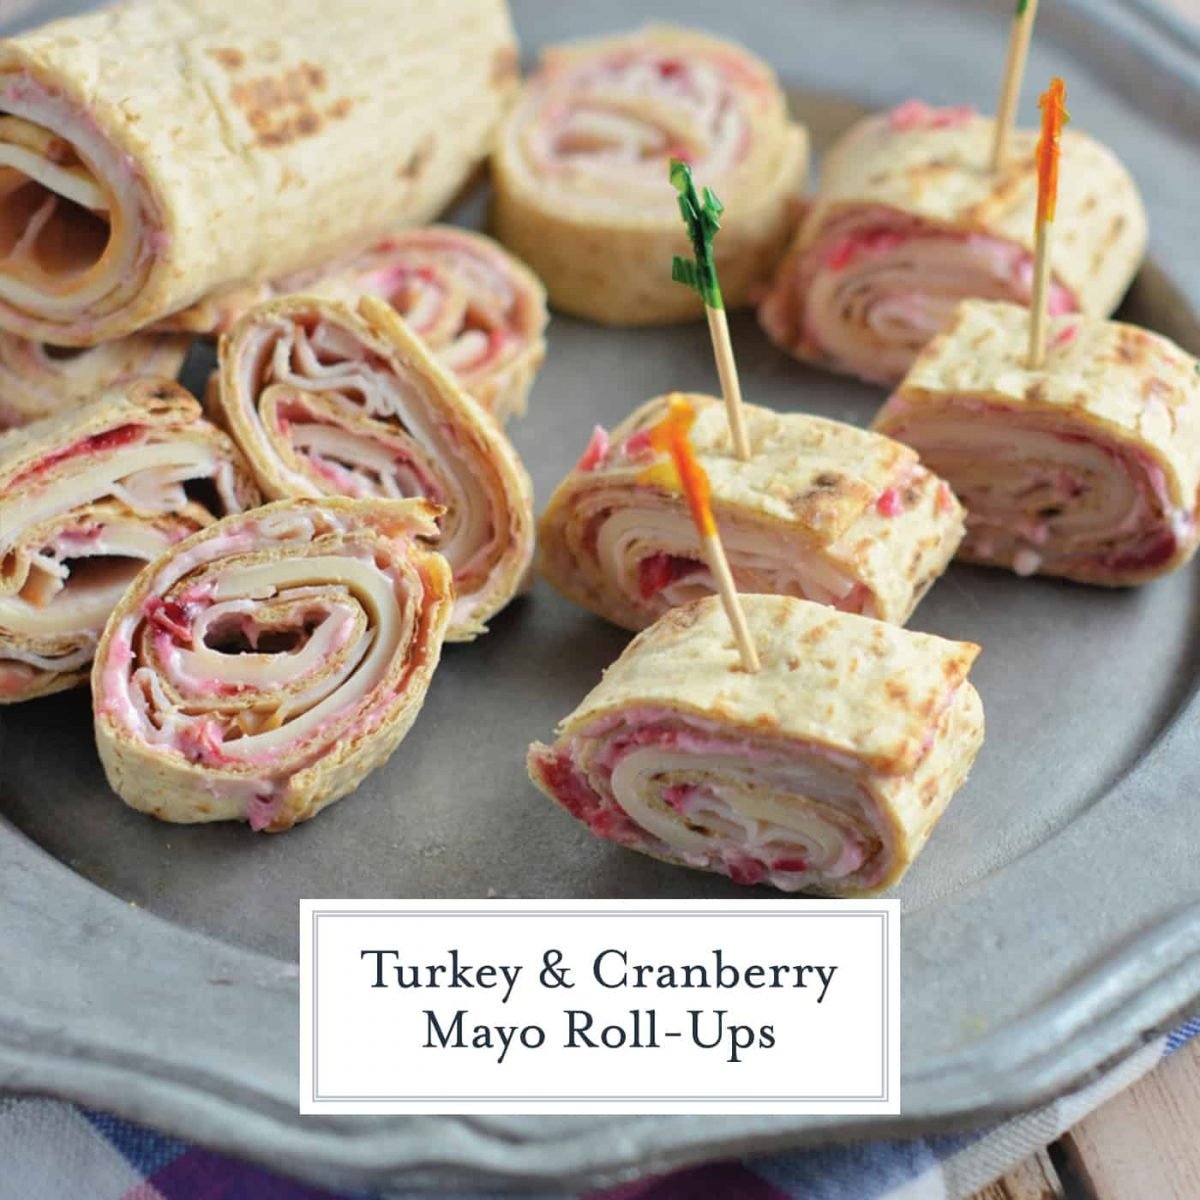 Turkey and Cranberry Mayo Roll-Ups- the perfect way to use your Thanksgiving leftovers for a fresh and delicious meal on the go. #turkeyrollups #cranberrymayo #thanksgivingleftovers www.savoryexperiments.com